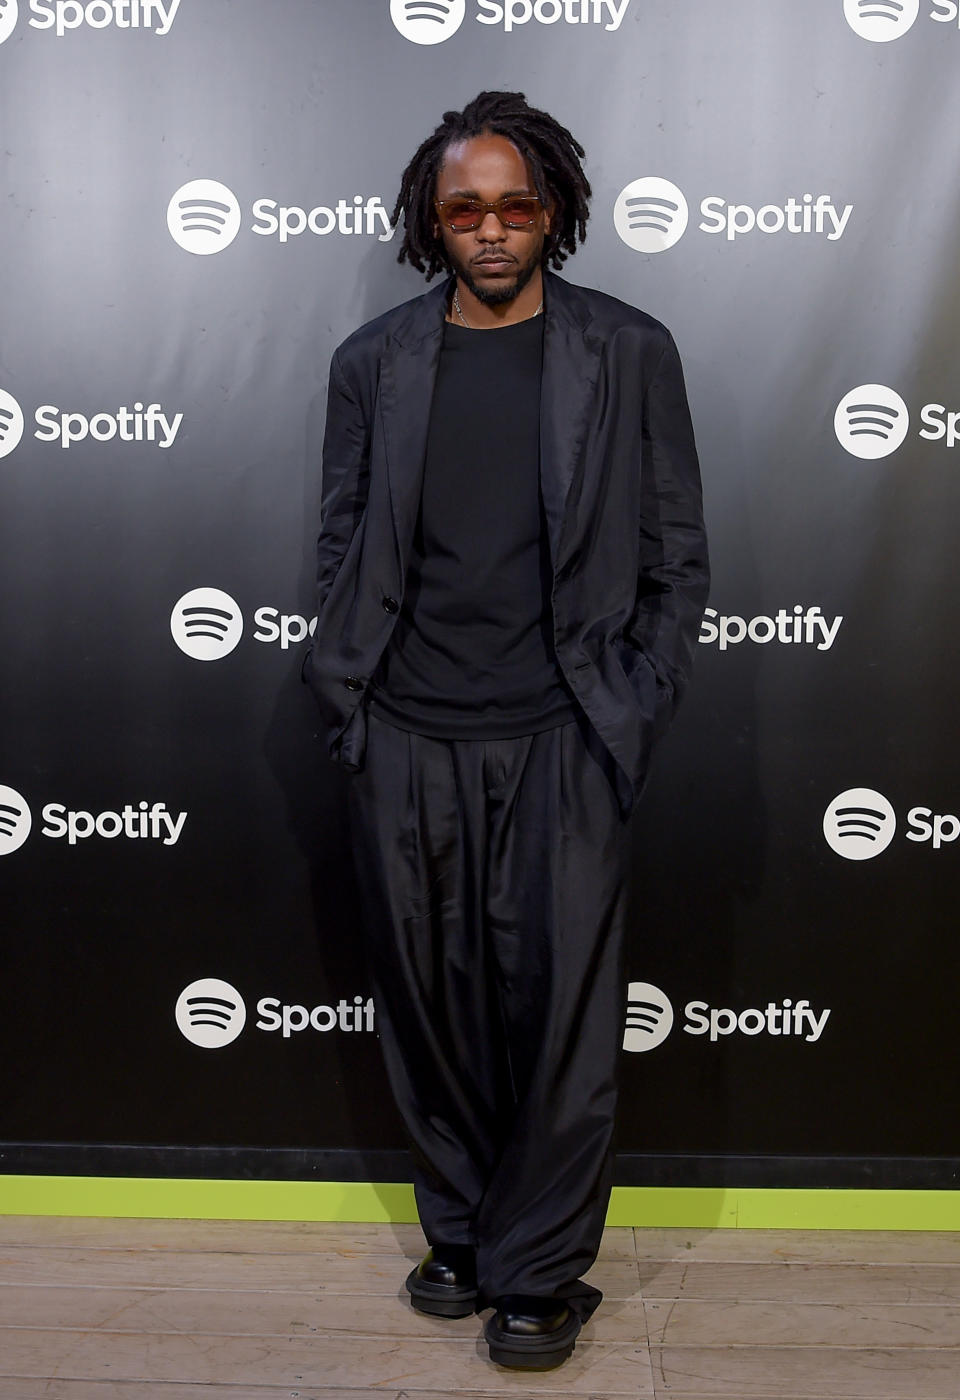 Kendrick Lamar poses backstage as Spotify hosts an evening of music with star-studded performances with DJ Pee .Wee aka Anderson .Paak and Kendrick Lamar, during Cannes Lions 2022, at Spotify Beach on June 20, 2022 in Cannes, France.